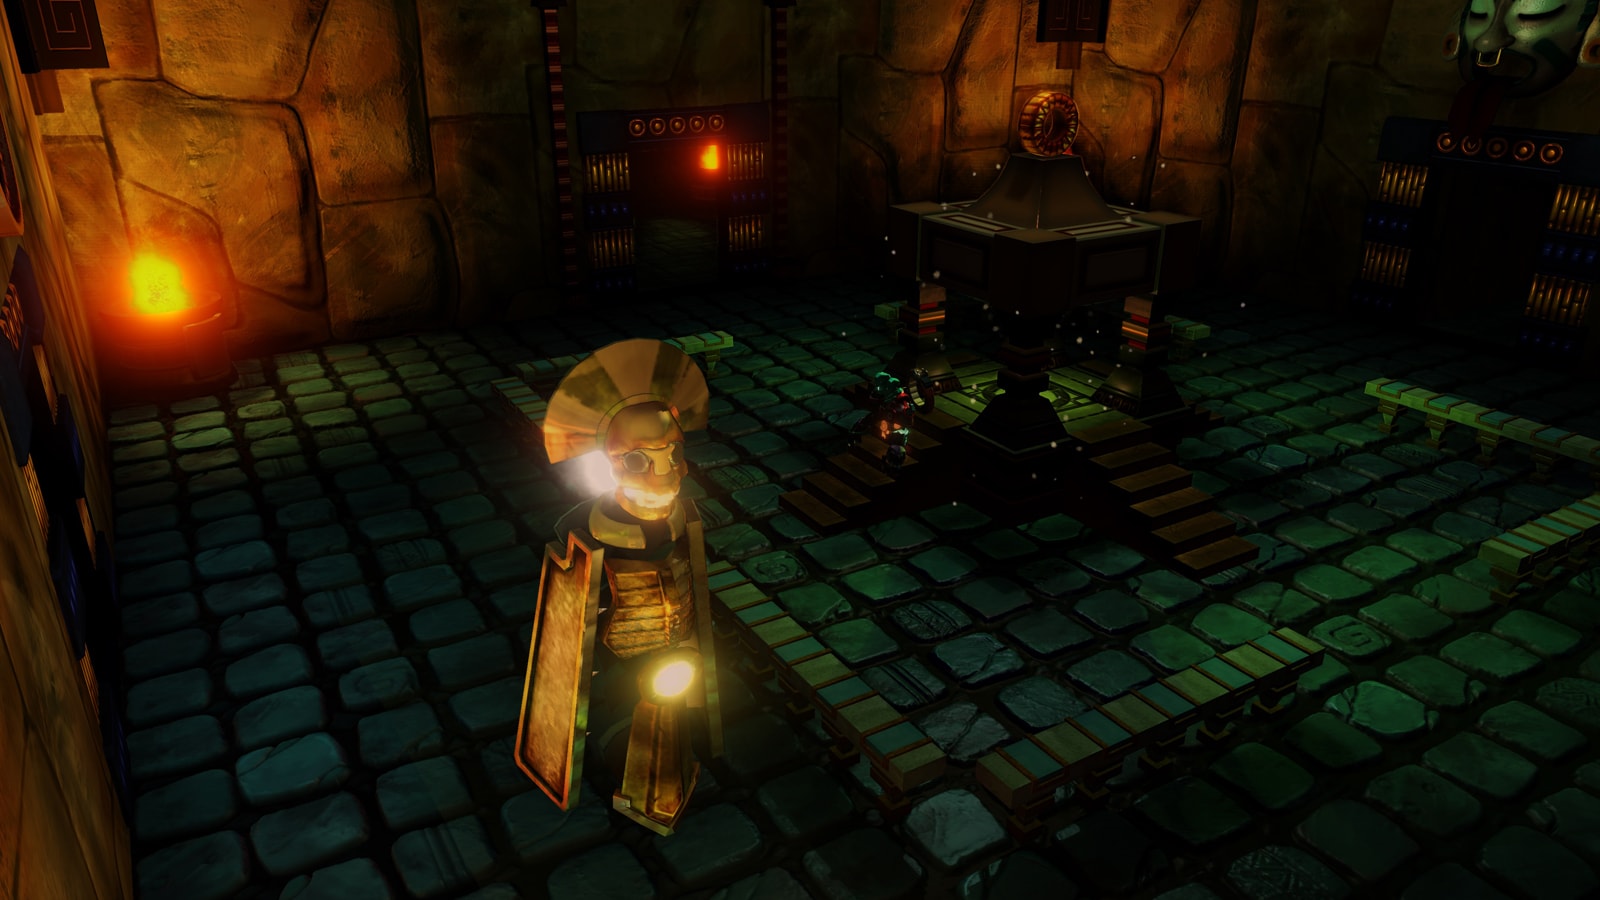 A glowing, gold Aztec statue stands on a cobblestone floor.